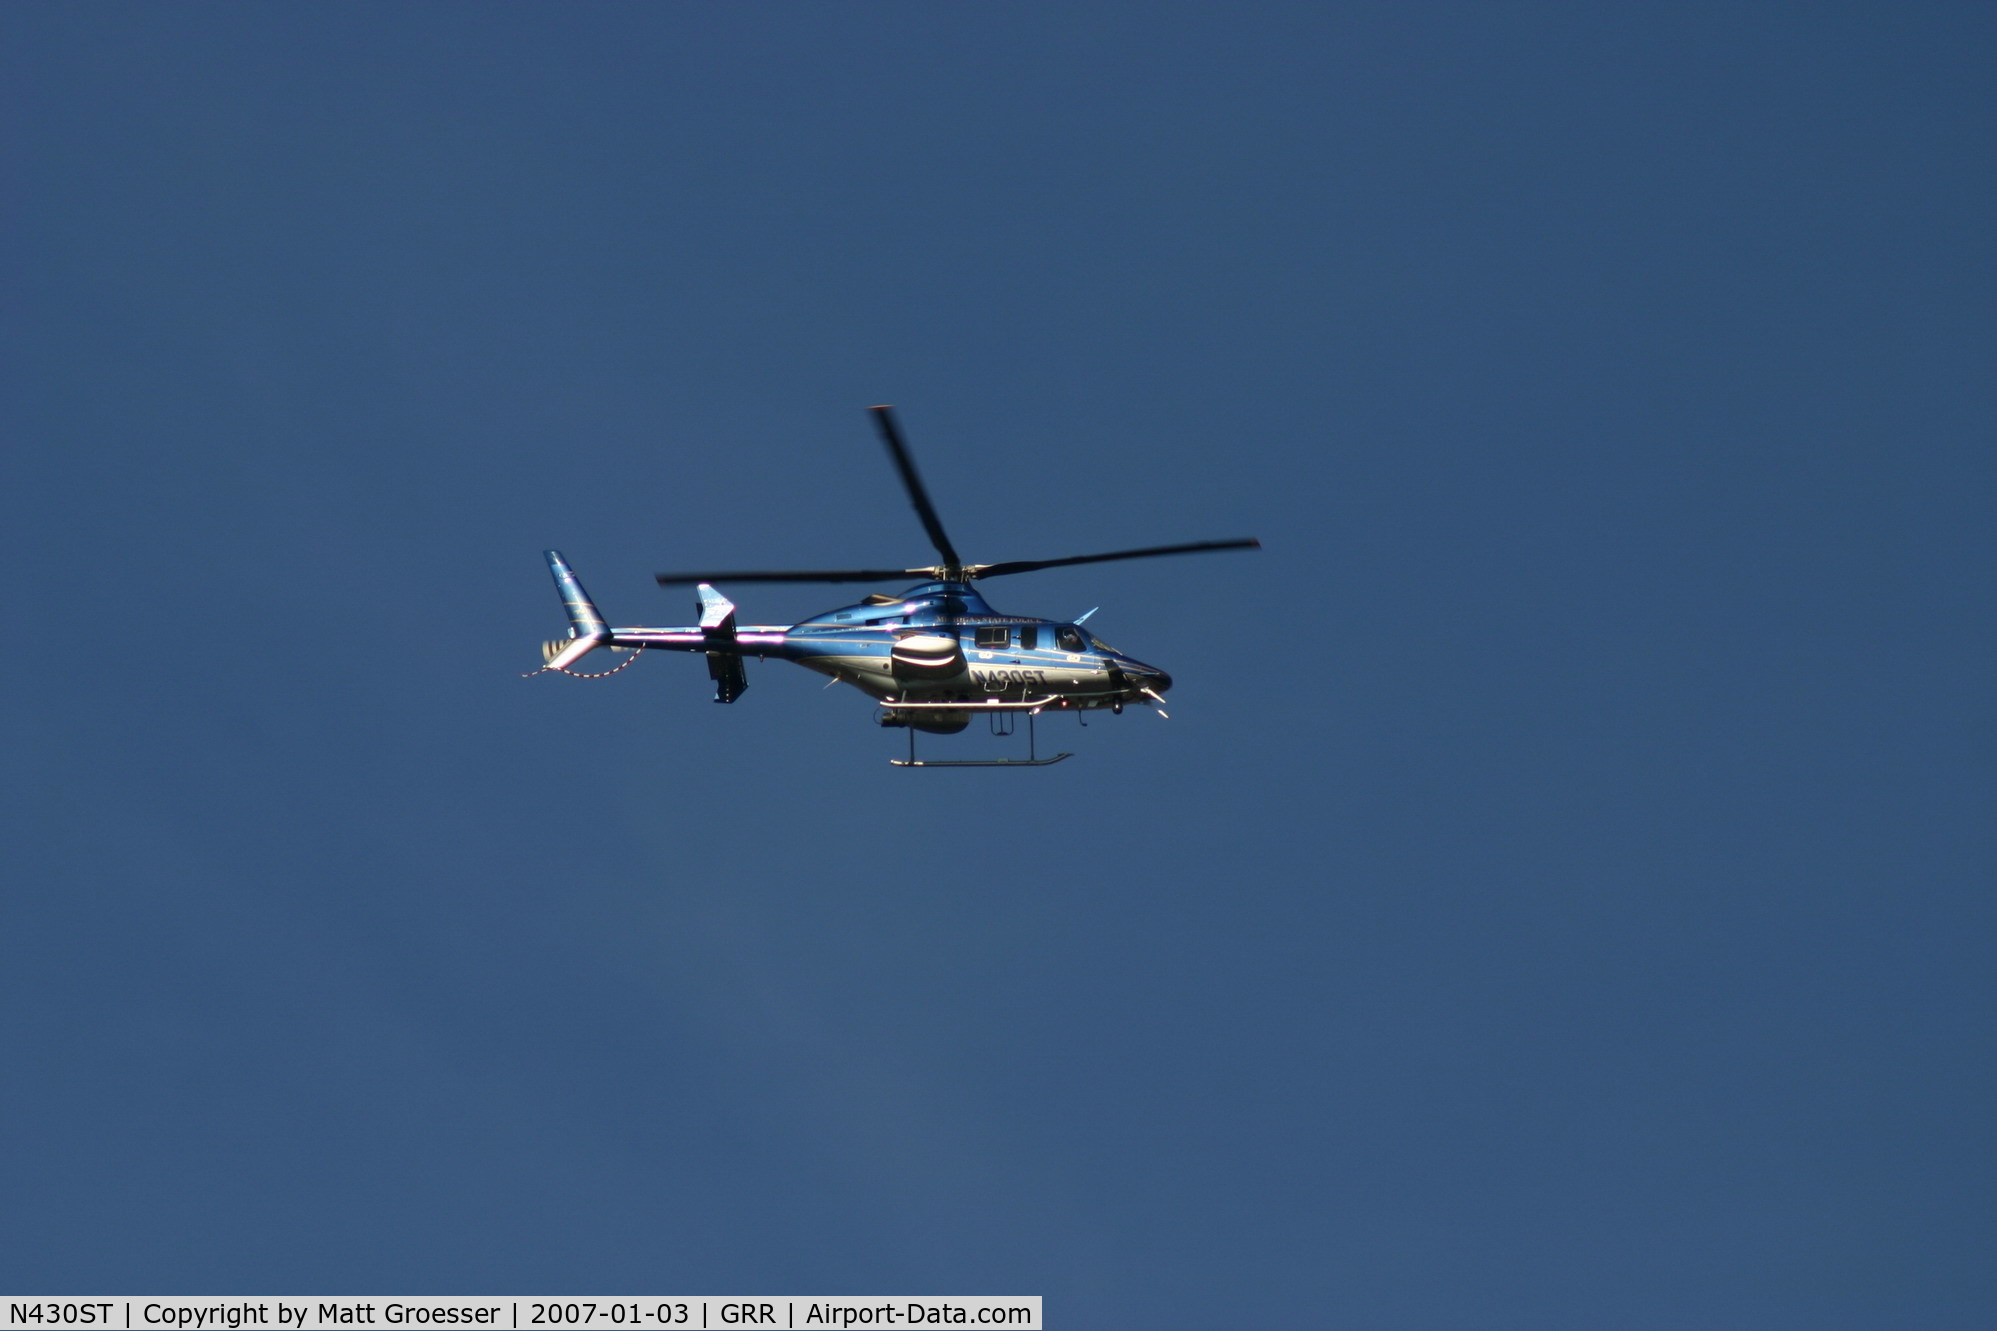 N430ST, 2000 Bell 430 C/N 49071, MSP helicopter over East Grand Rapids Church for Gerald R. Ford funeral security detail